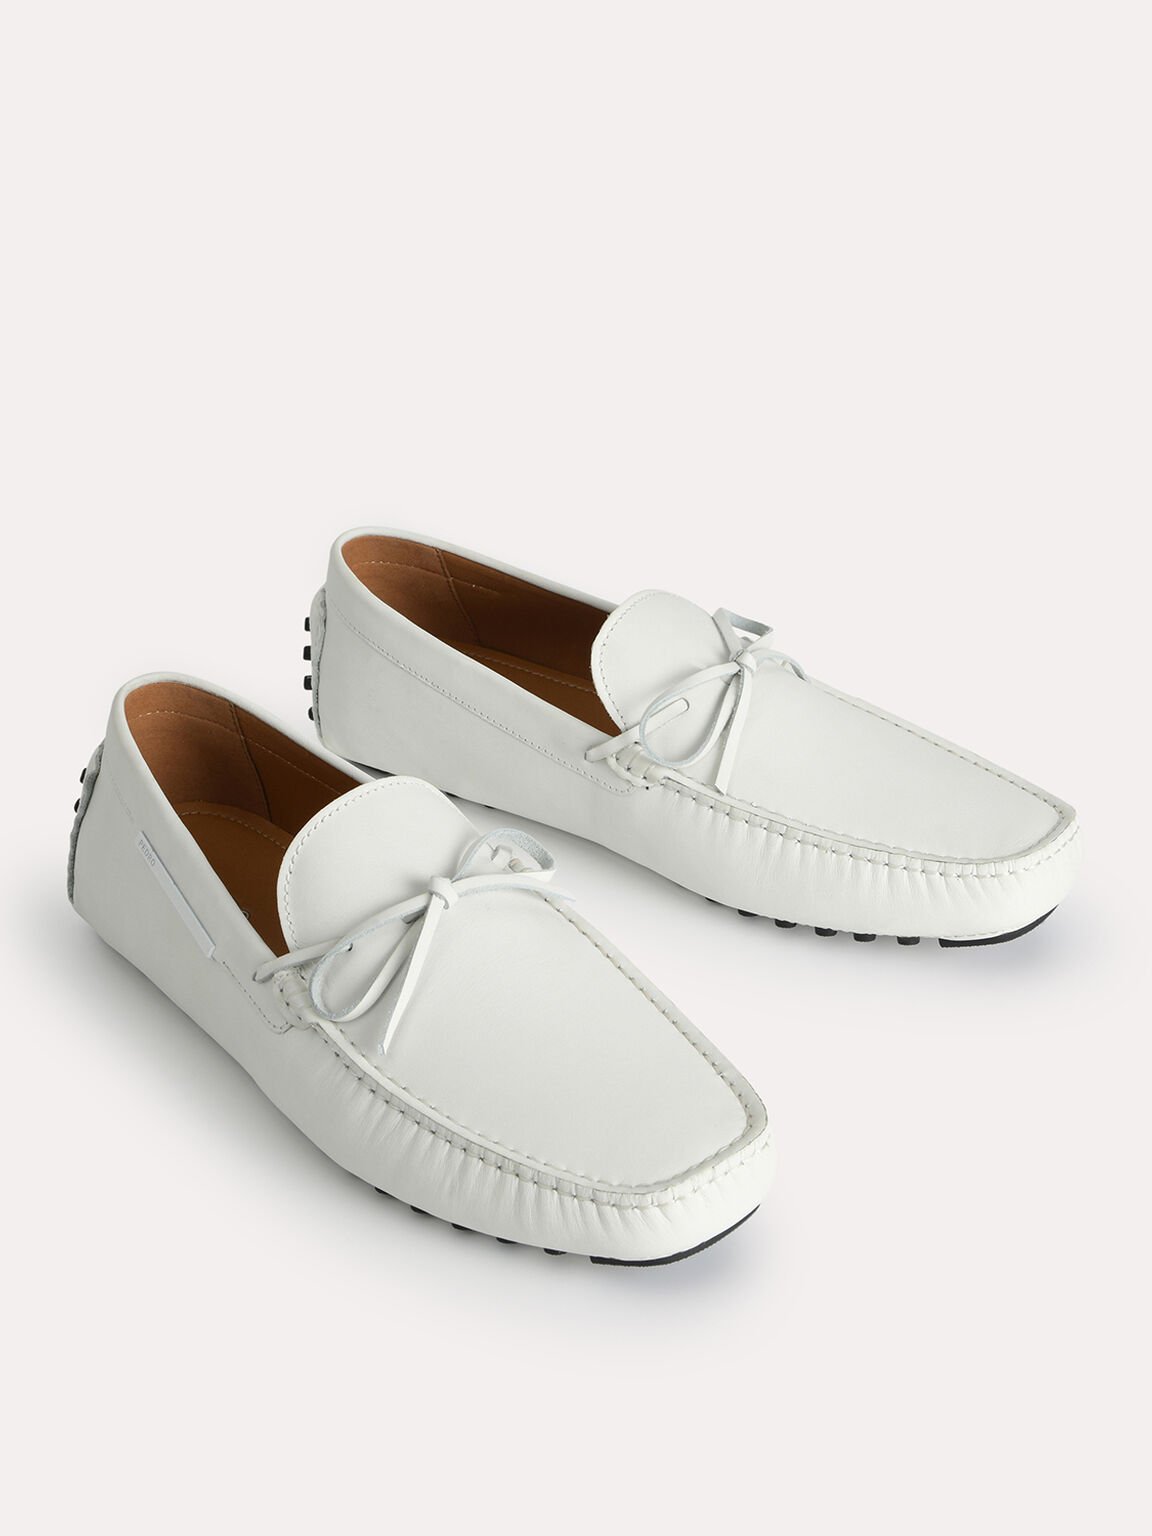 Leather Moccasins with Bow Detailing, White, hi-res